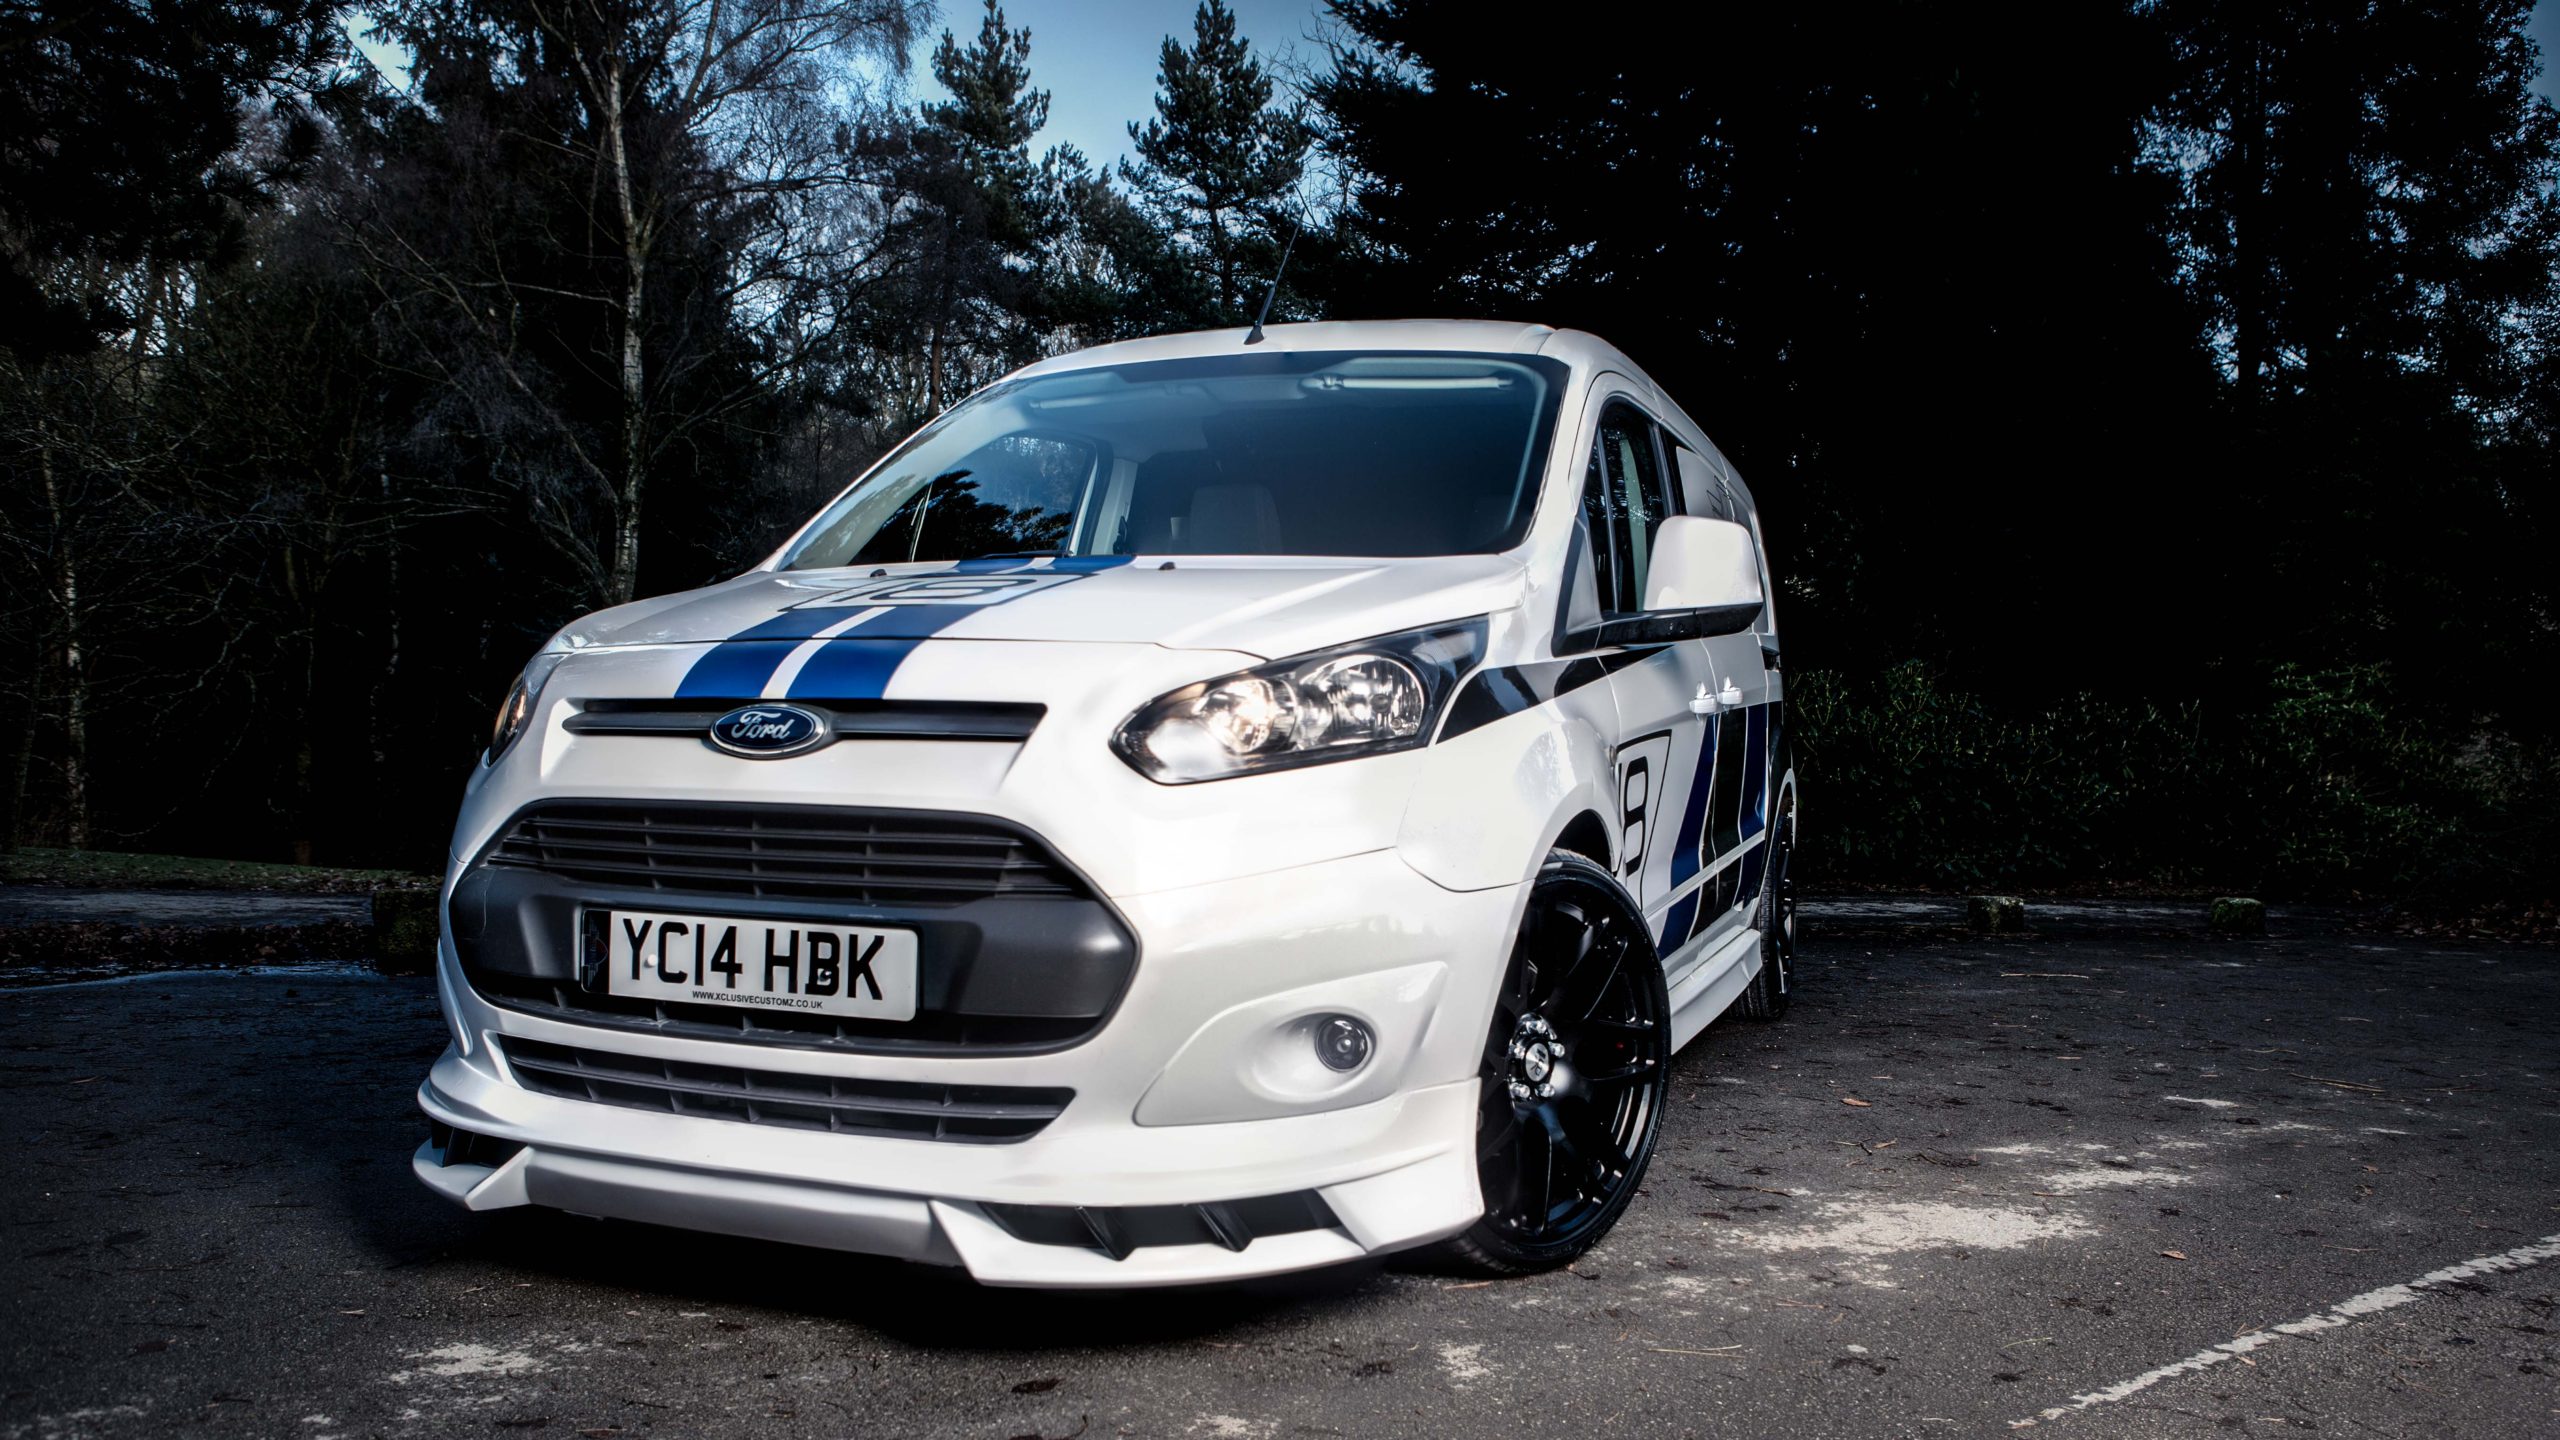 Here is a photo of the Ford Transit Connect with the "xclusive Bodykit" Attached